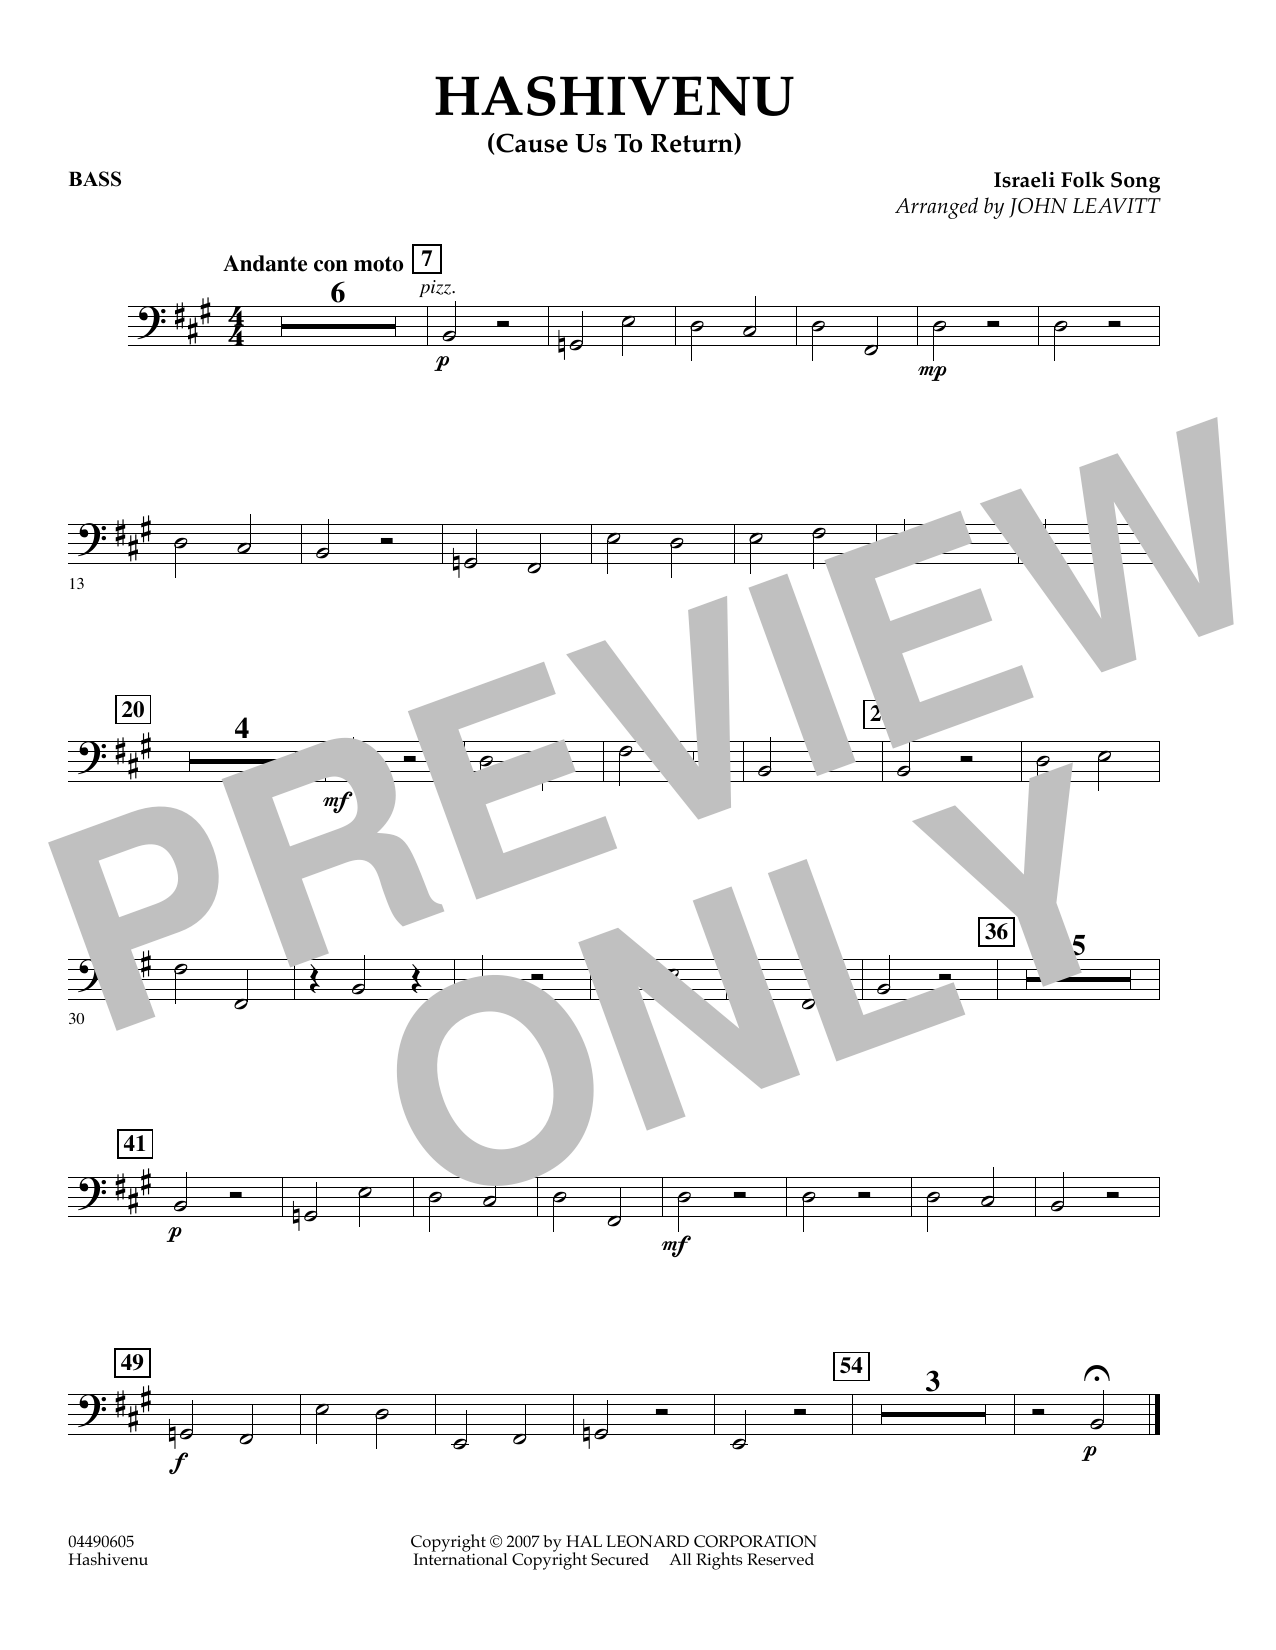 John Leavitt Hashivenu (Cause Us to Return) - String Bass sheet music preview music notes and score for Orchestra including 1 page(s)